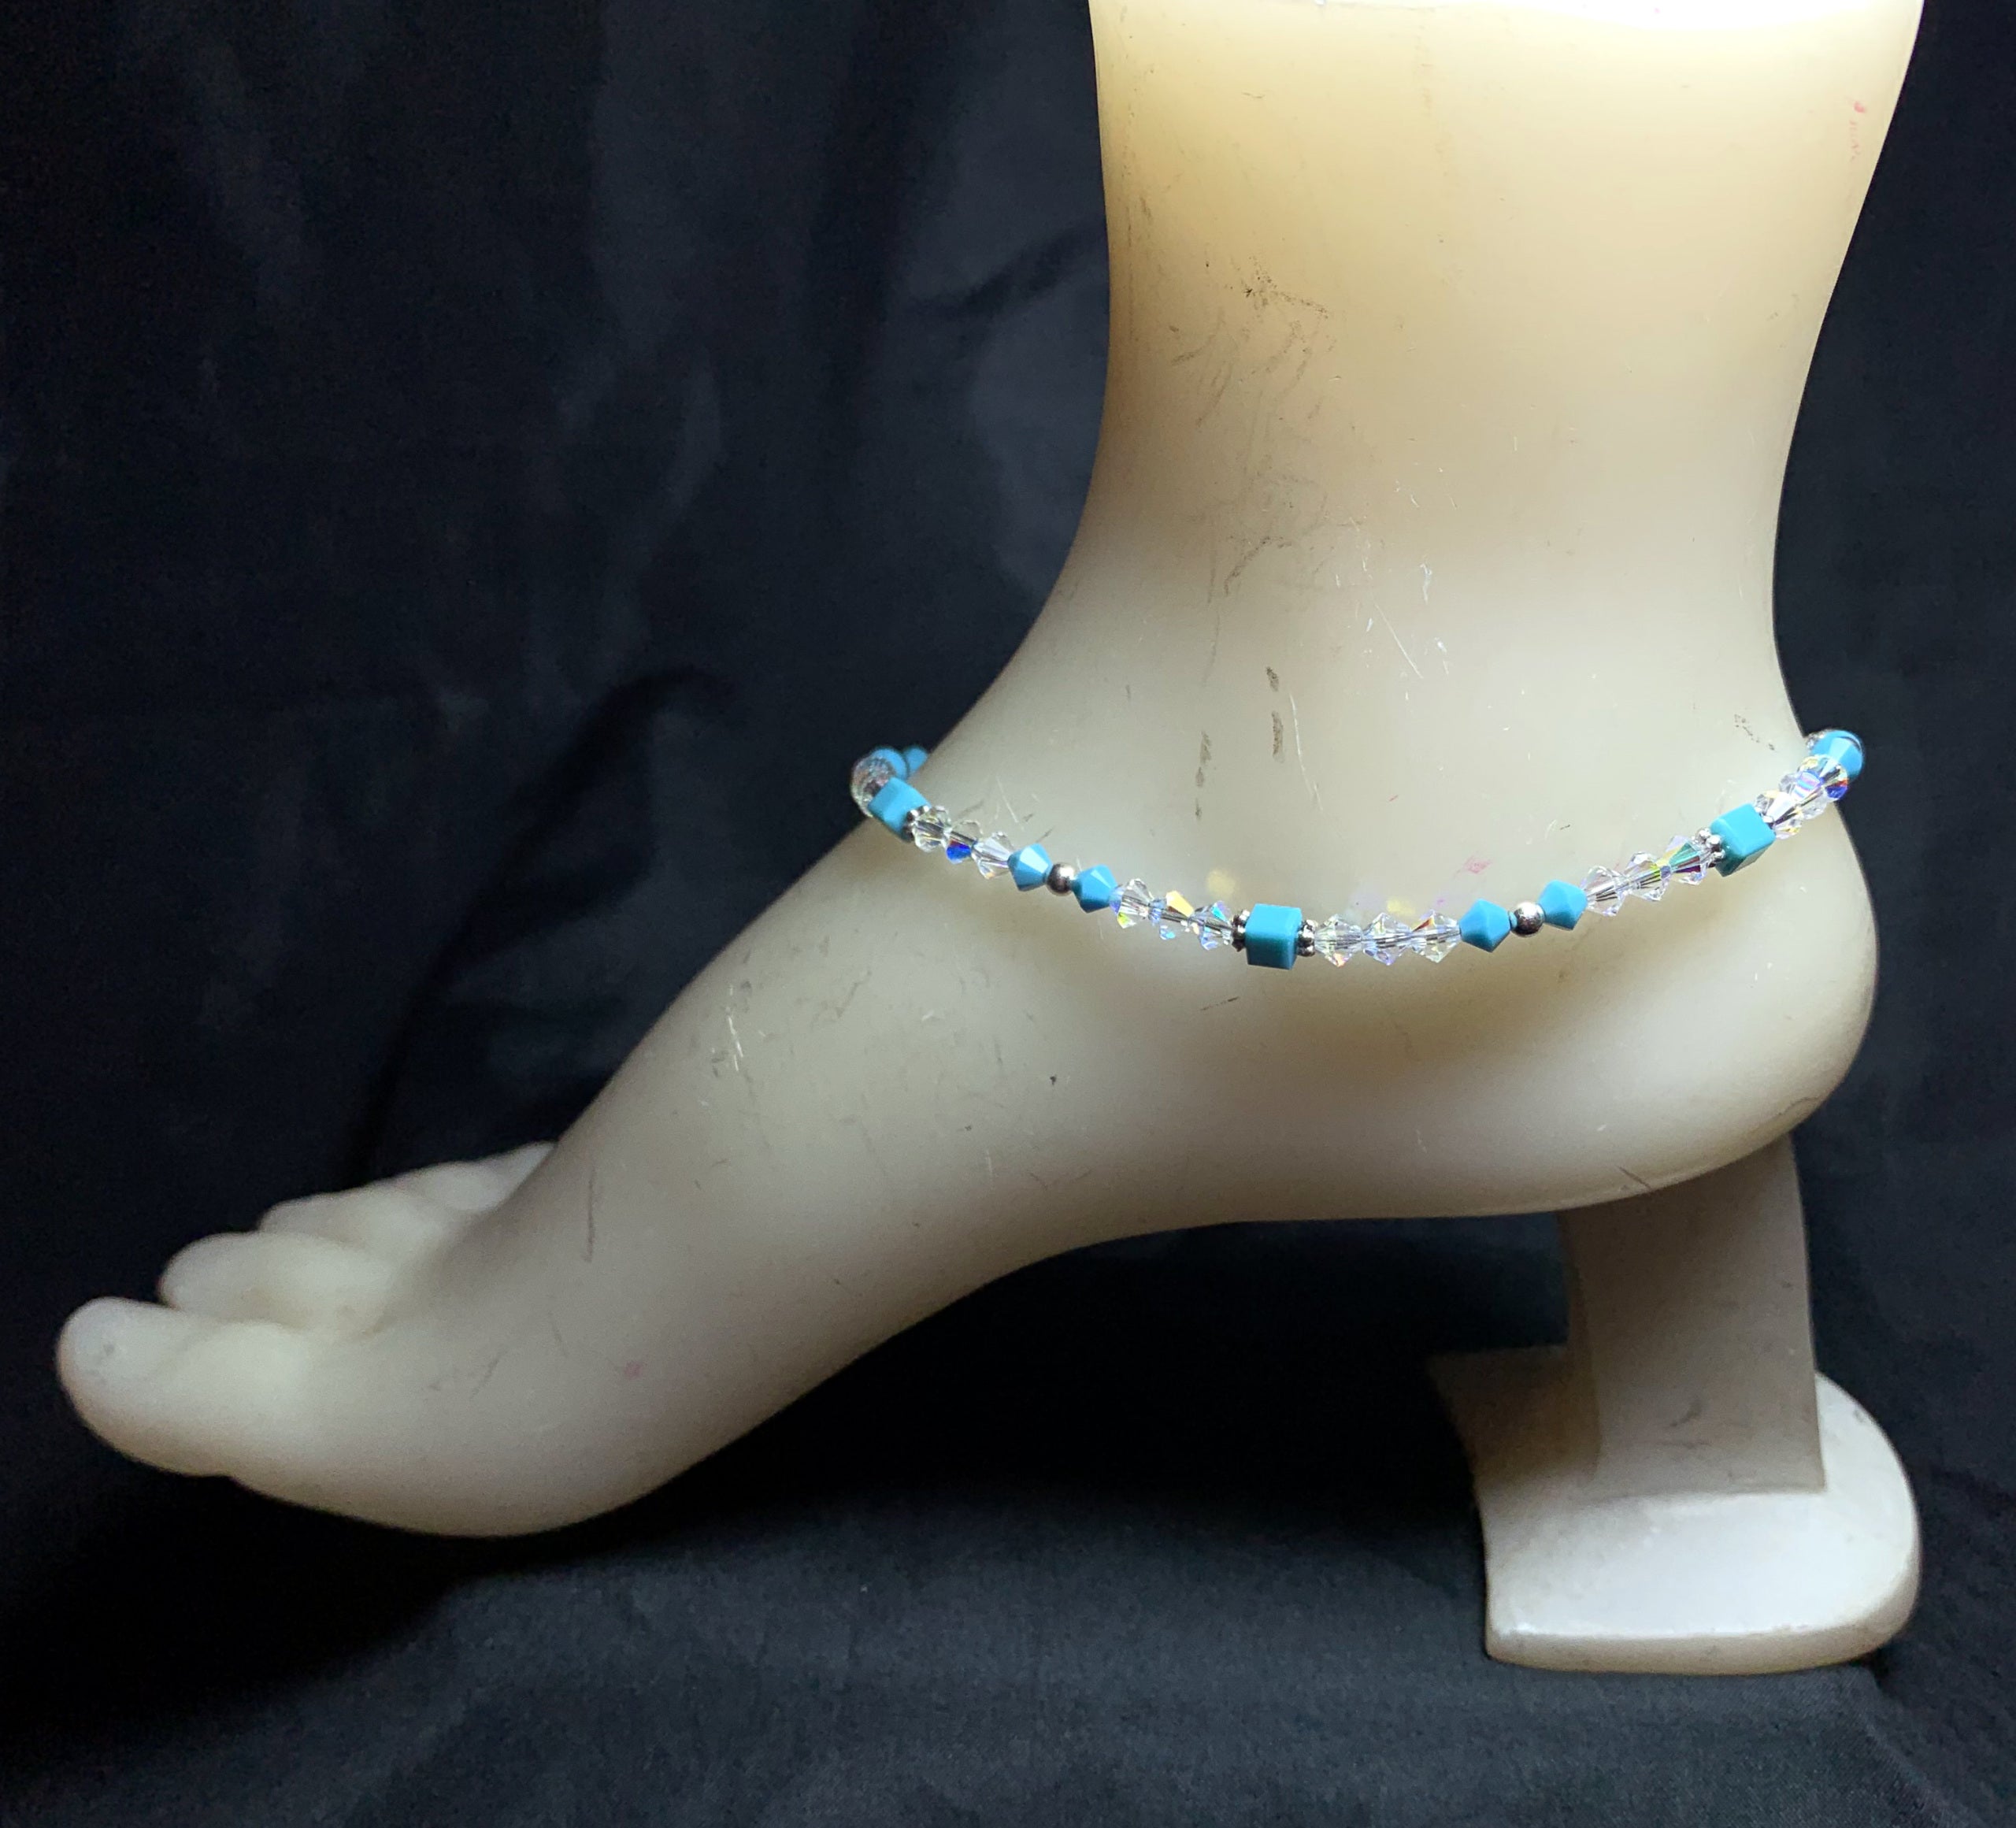 Amazon.com: Sterling silver anklet with clear Swarovski crystals,  adjustable chain ankle bracelet for women, simple dainty minimalist beach  jewelry - Handcrafted in the USA. : Handmade Products